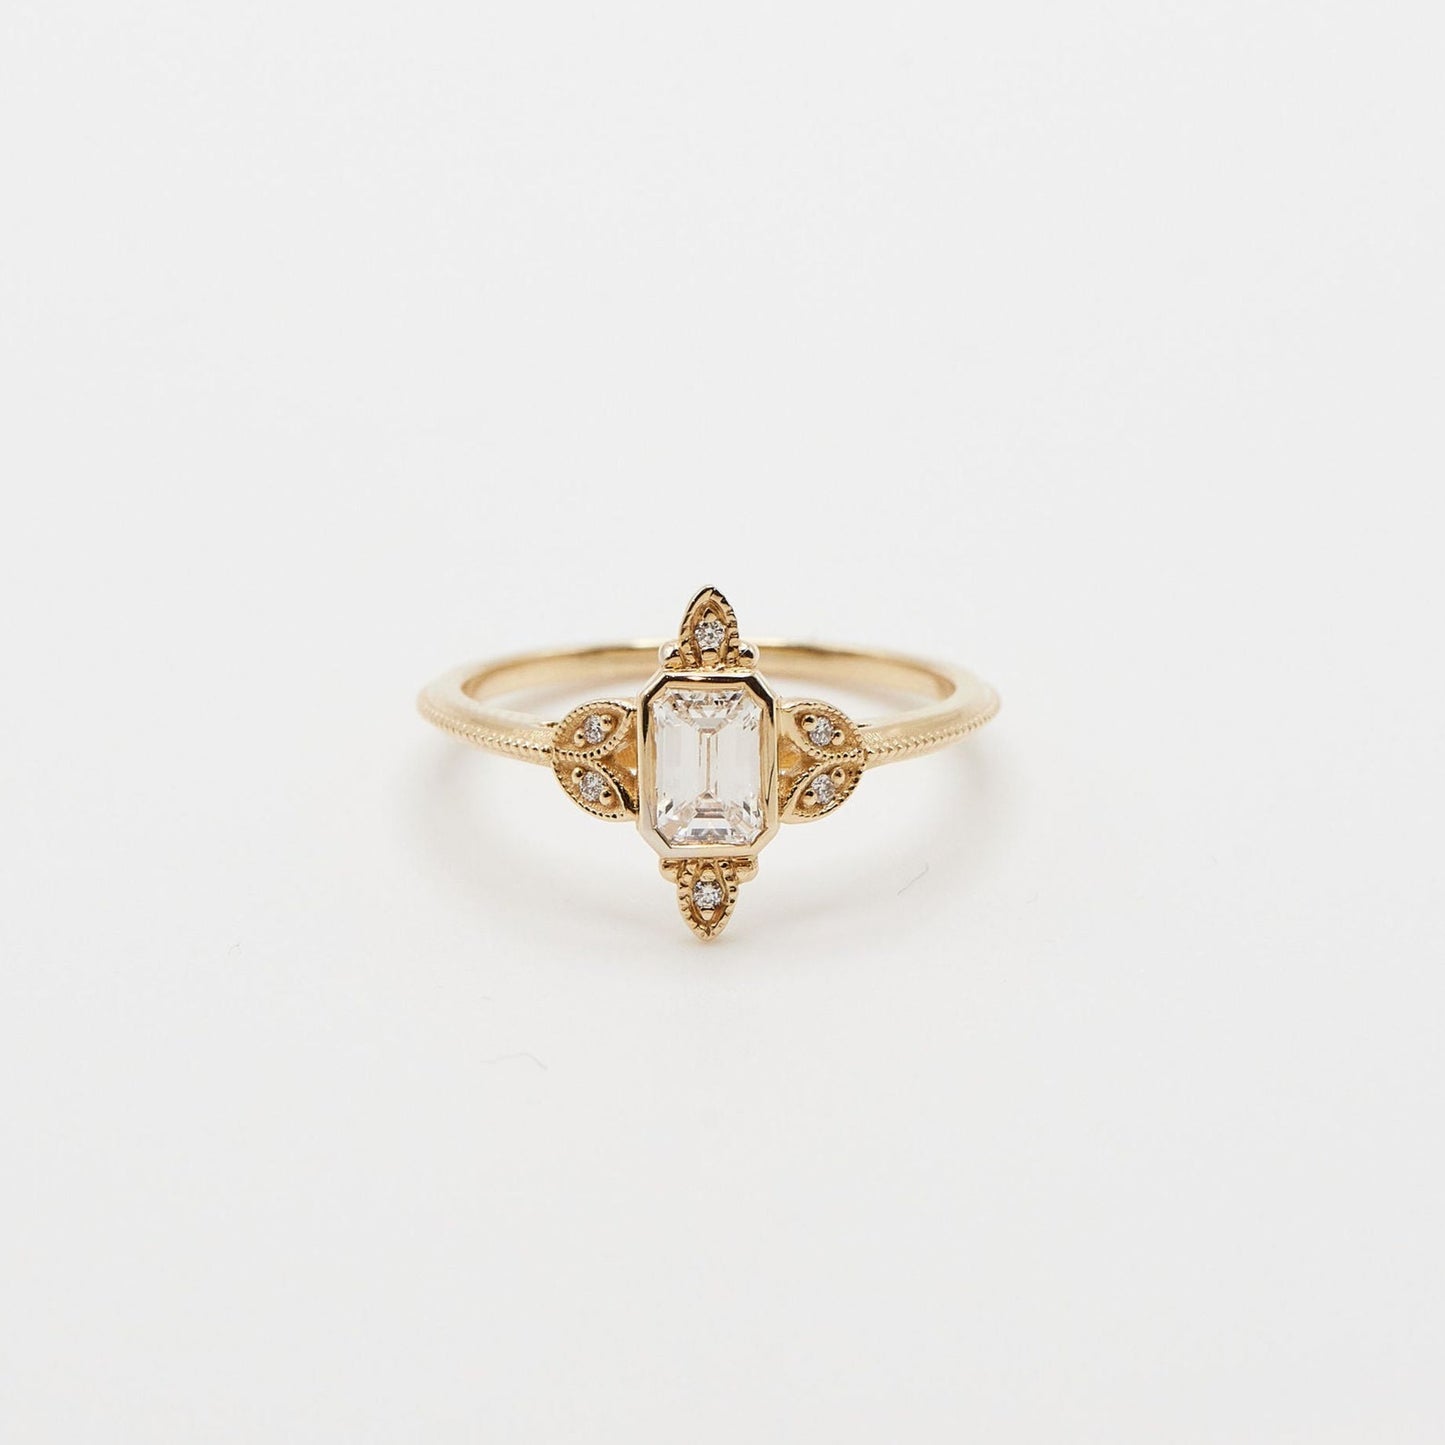 emerald cut diamond ring with milgrain and diamond accents on each side in yellow gold on white background